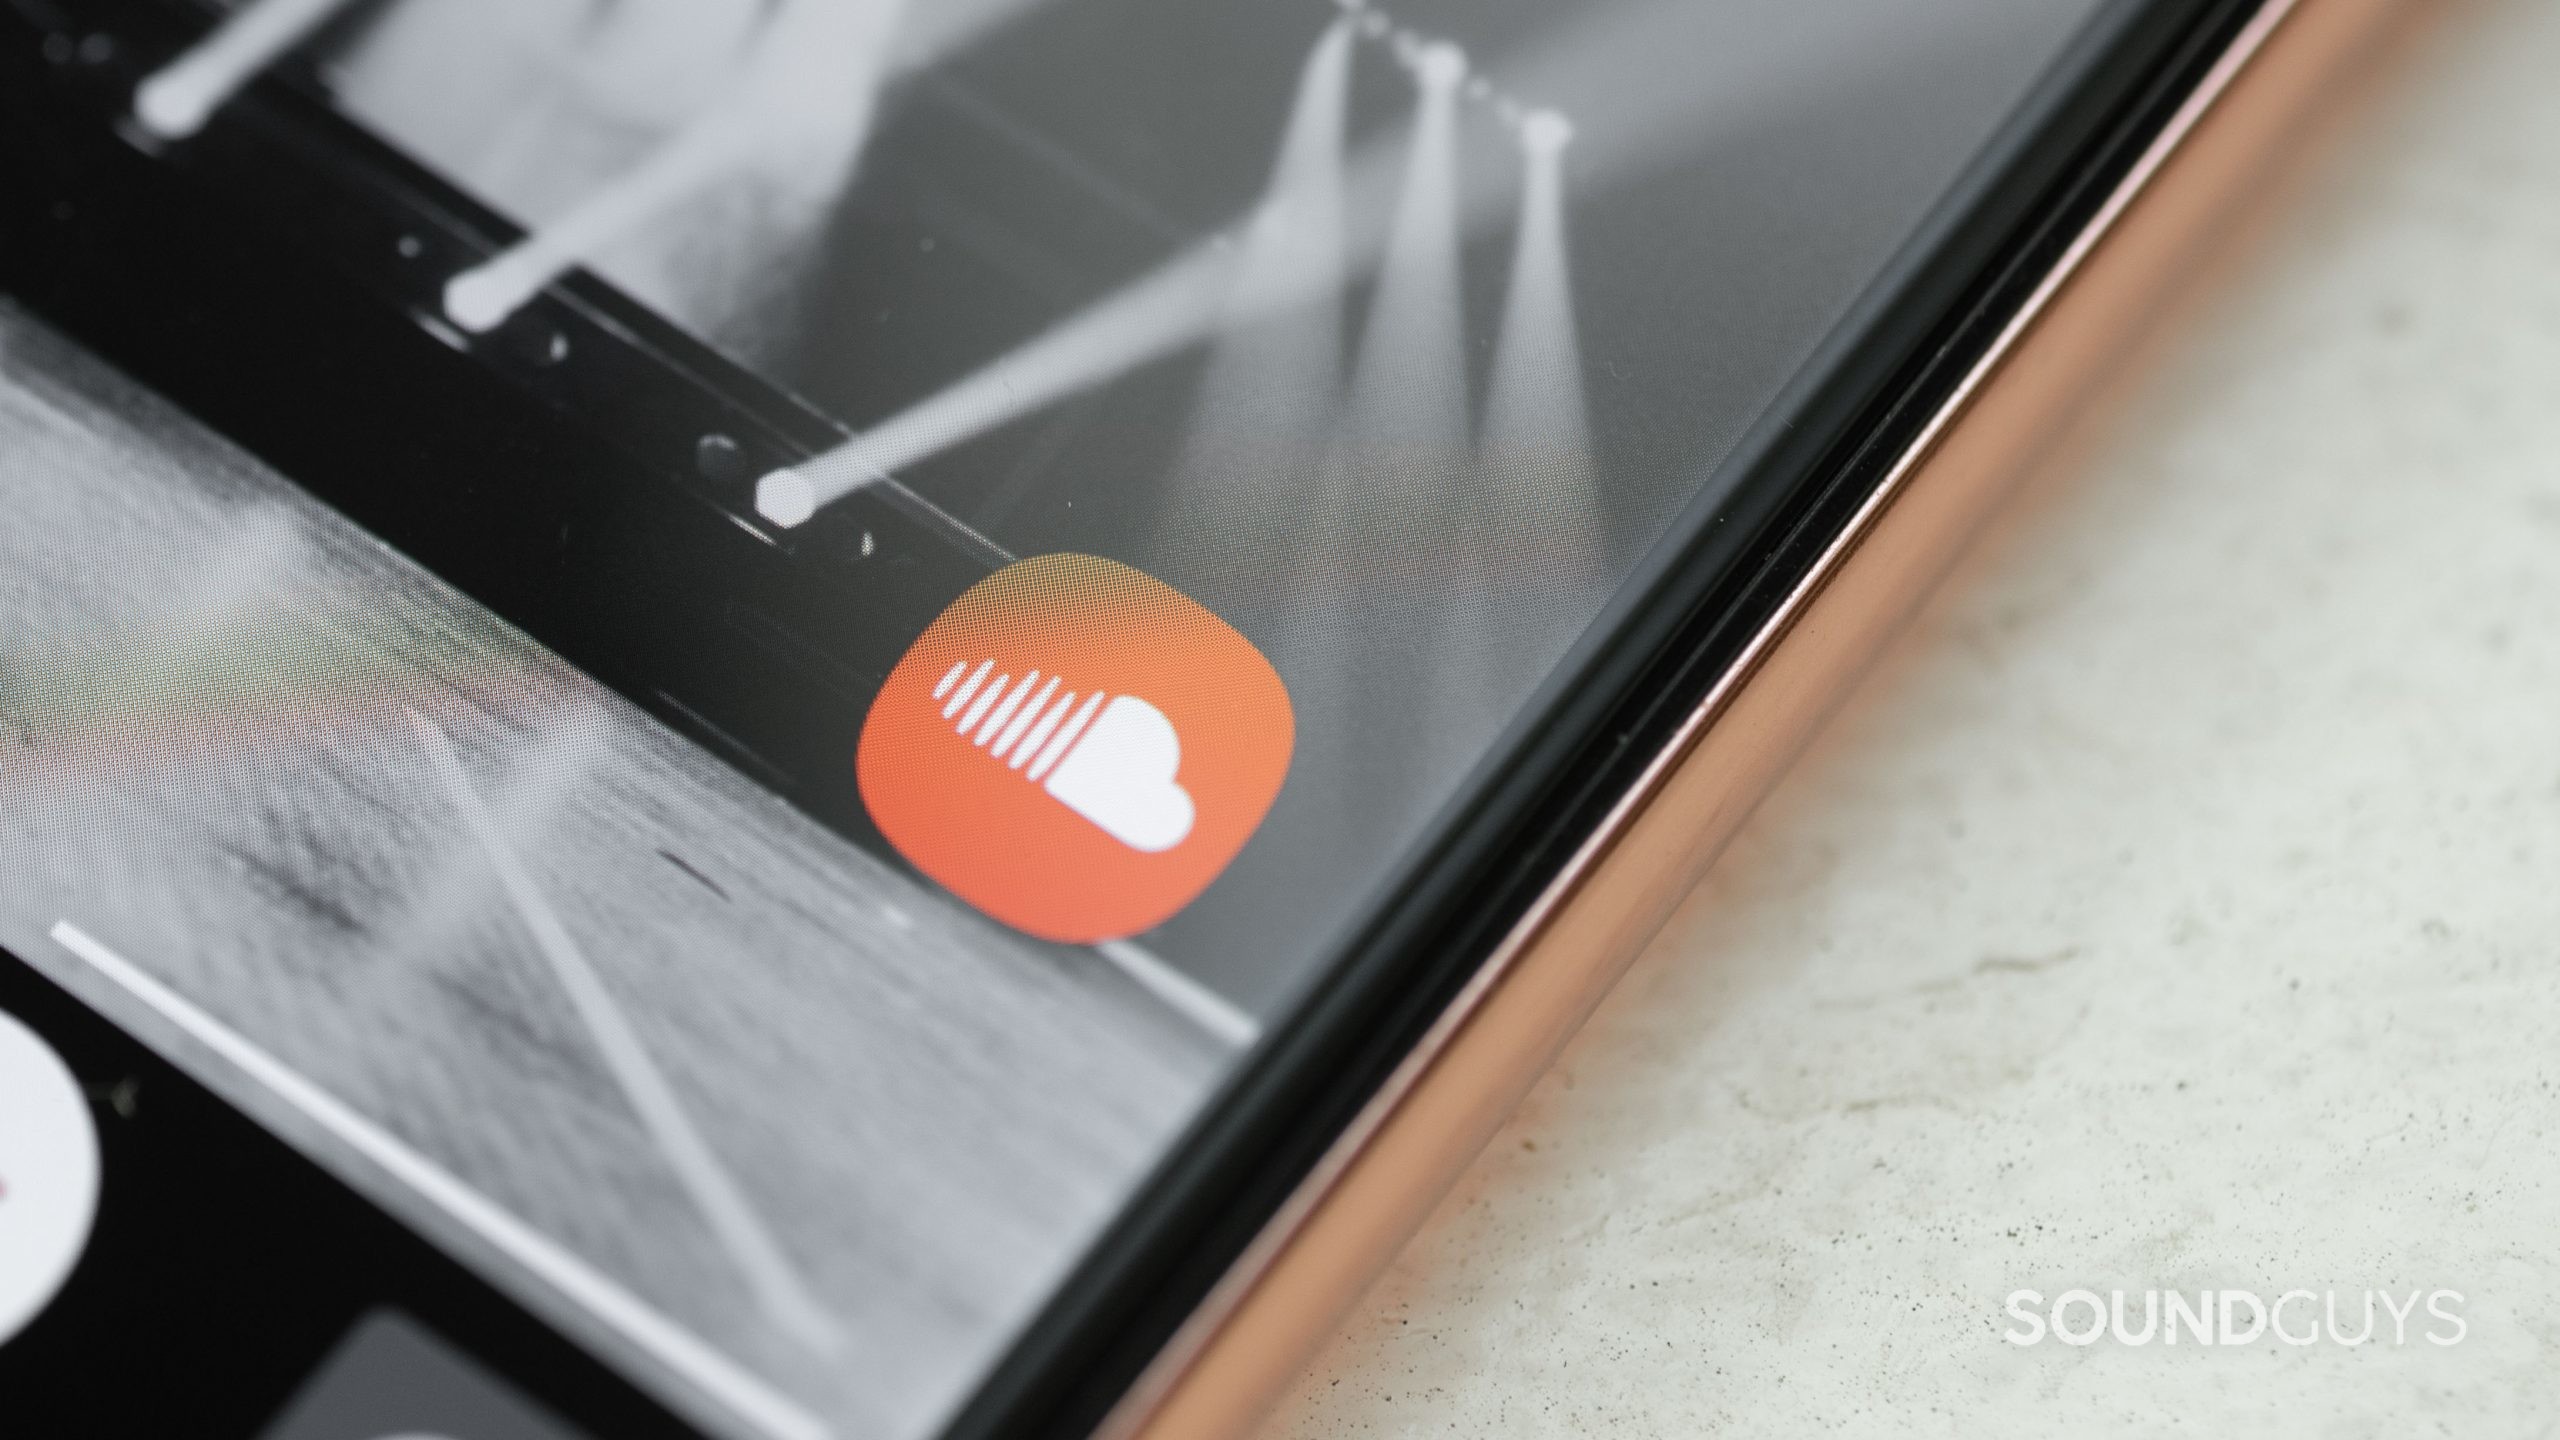 The mobile SoundCloud app icon on a smartphone display.